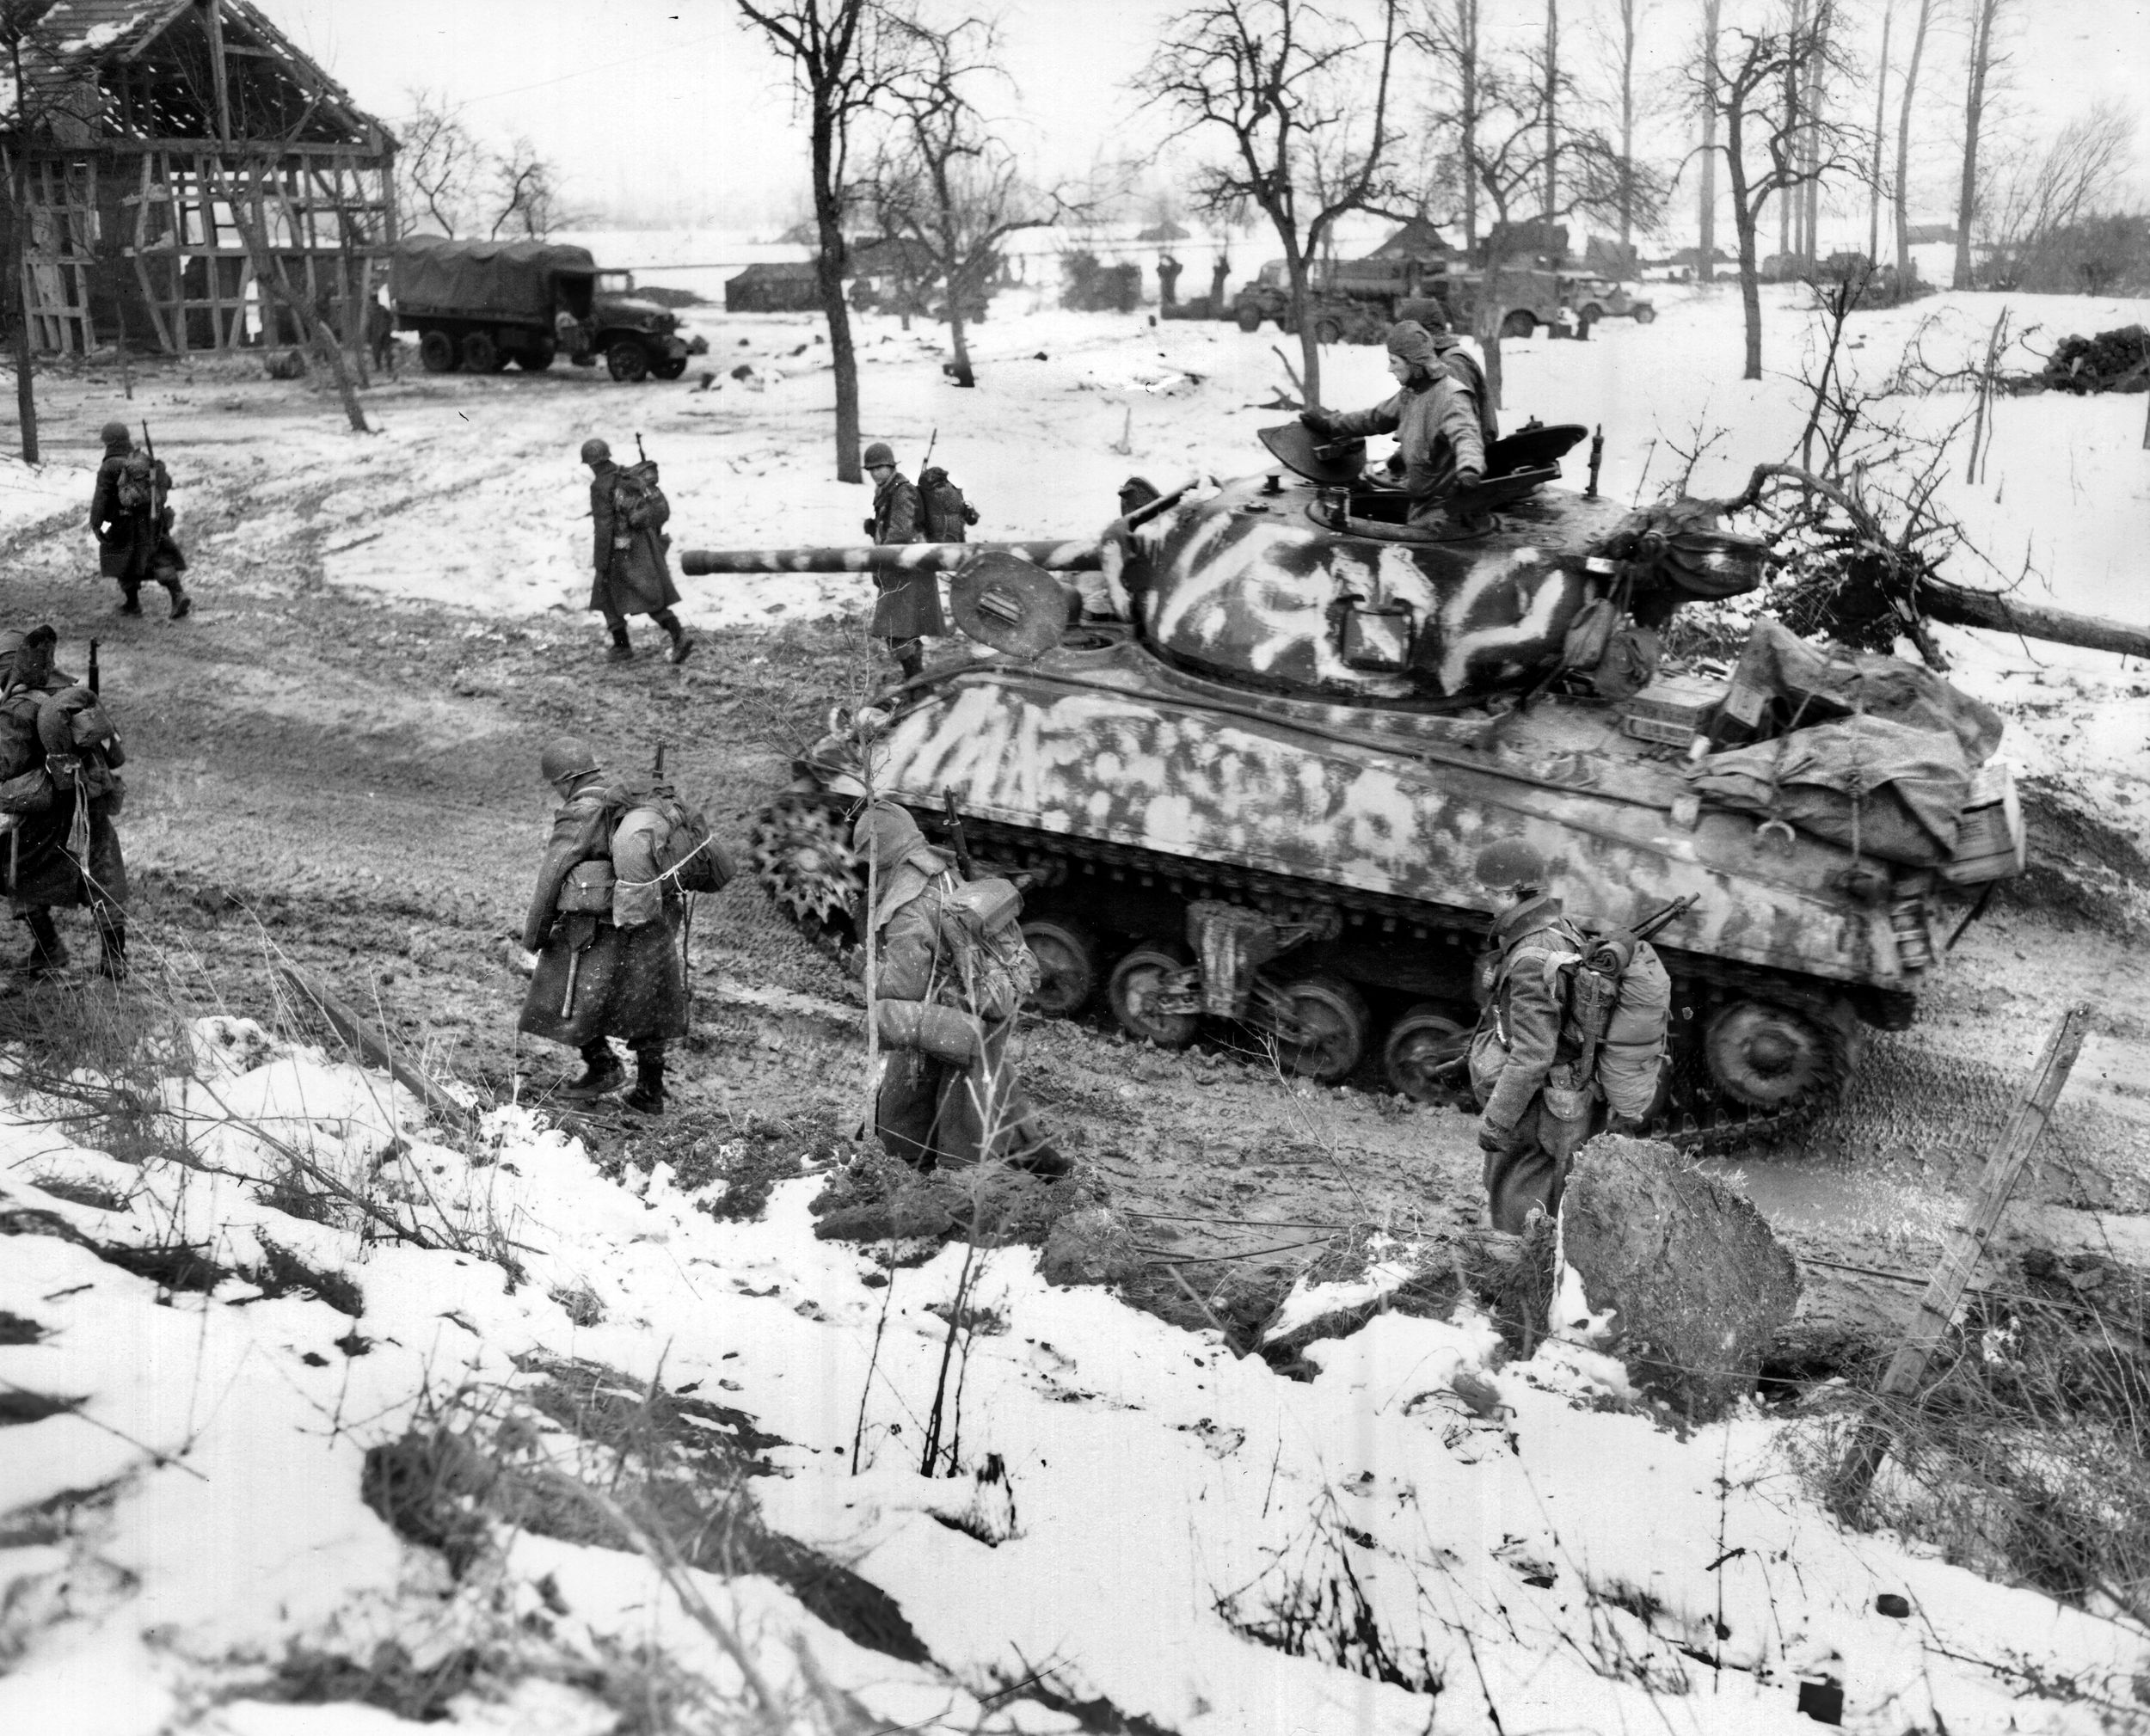 Soldiers of the U.S. 75th Infantry Division tramp through the snow in the Colmar Pocket sector in the Alsace region. The pocket, which consisted of 850 square miles on the west side of the Rhine River, was the last piece of German-held territory on French soil.